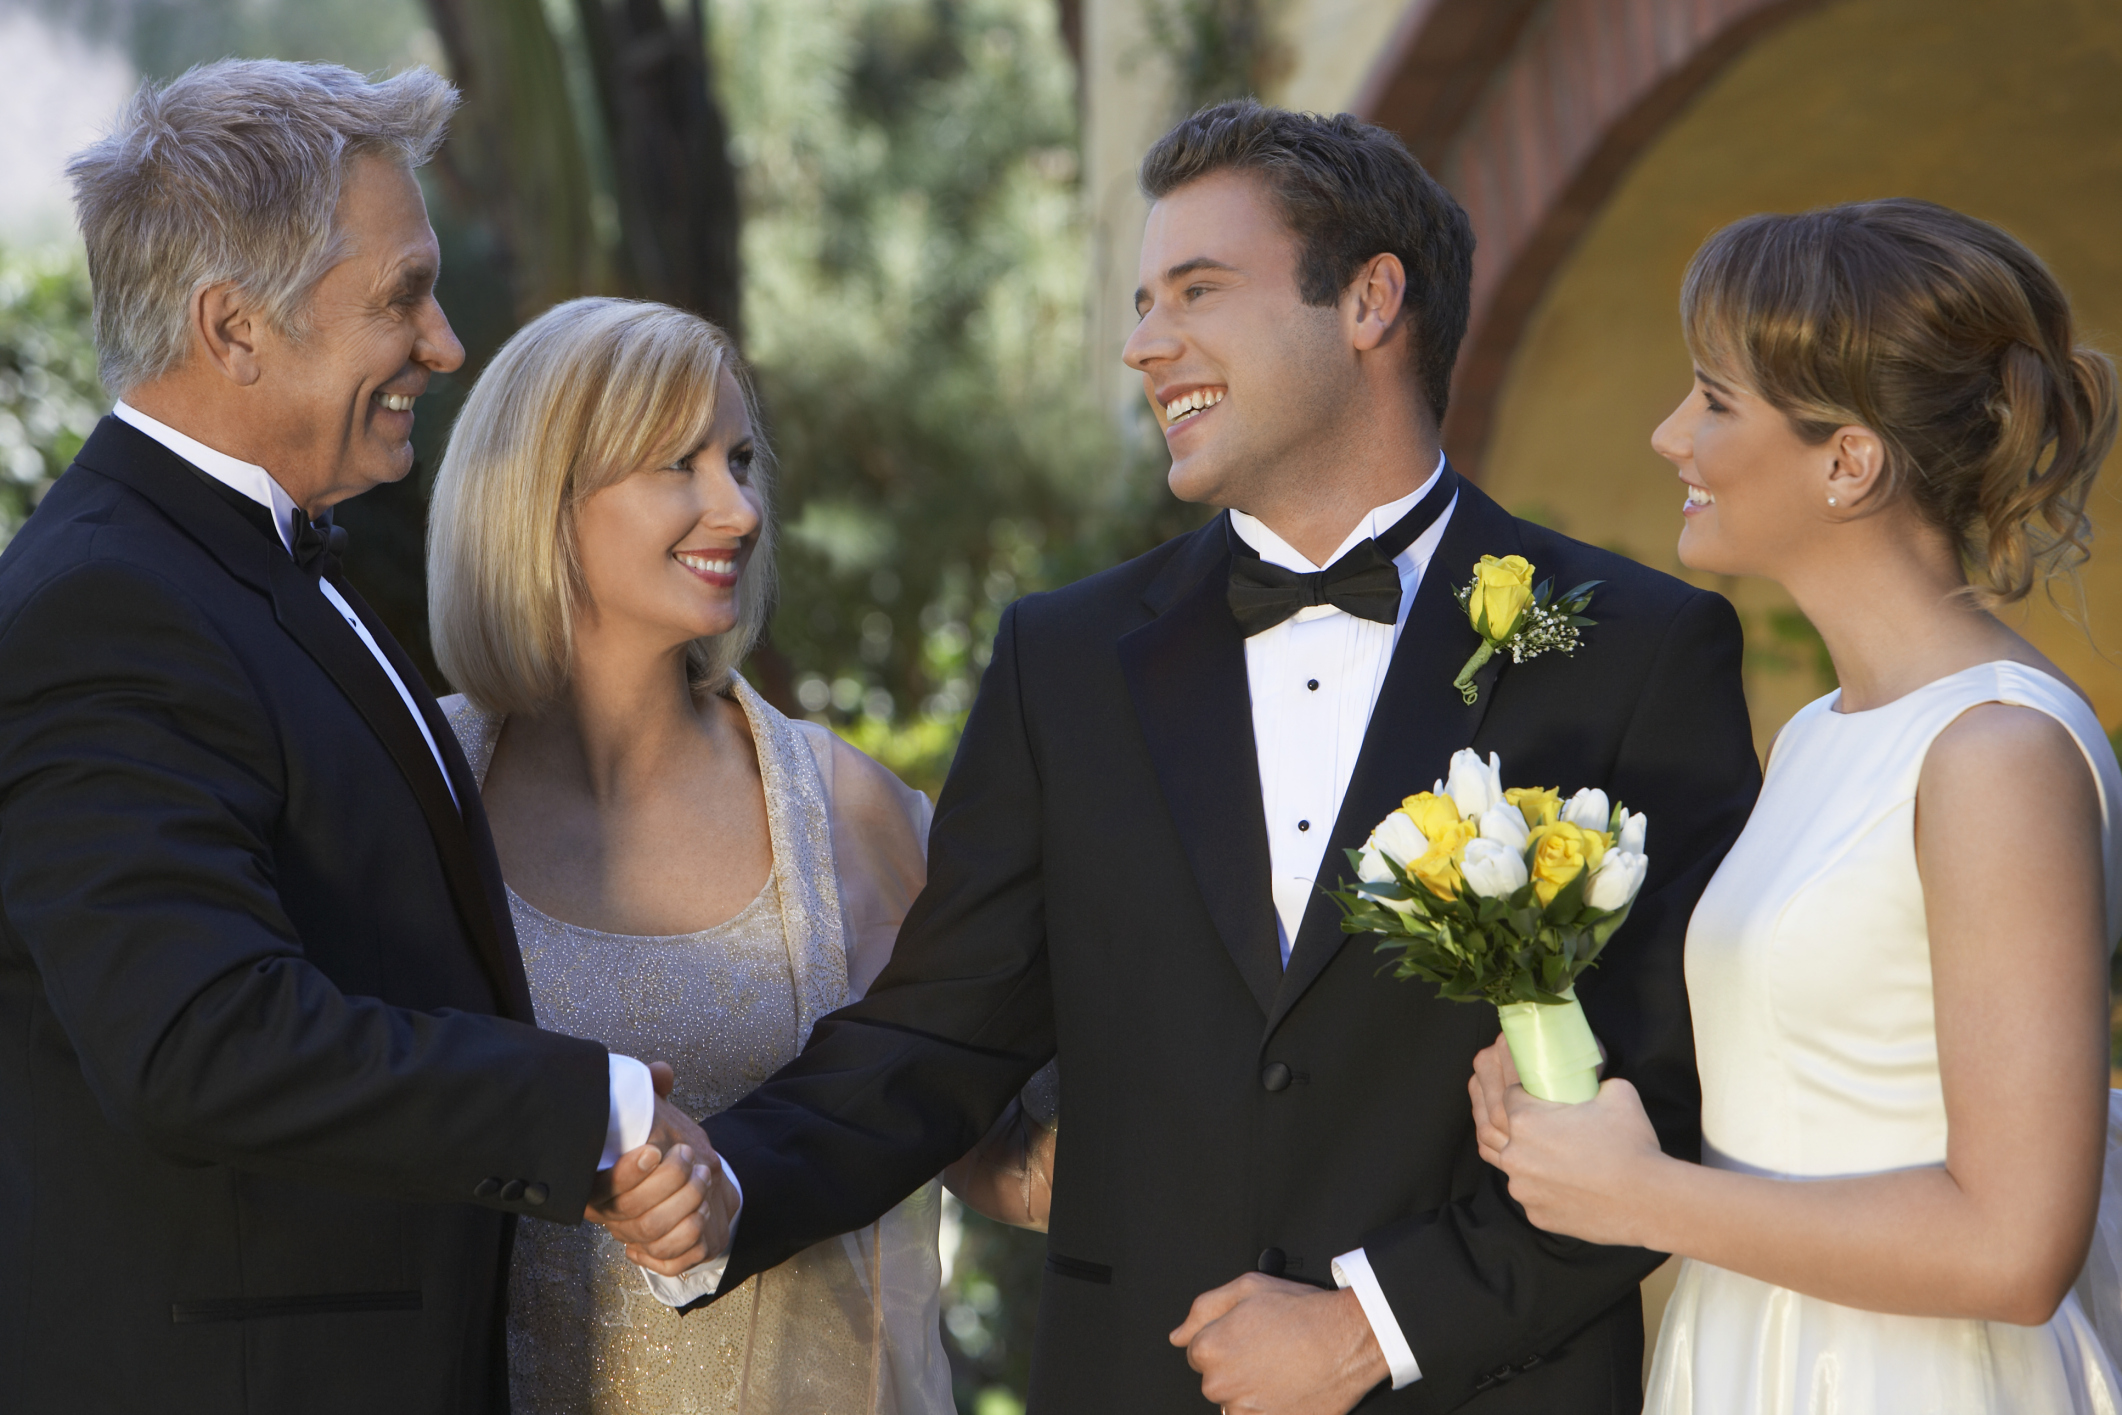 A-Z of getting your parents involved in wedding planning